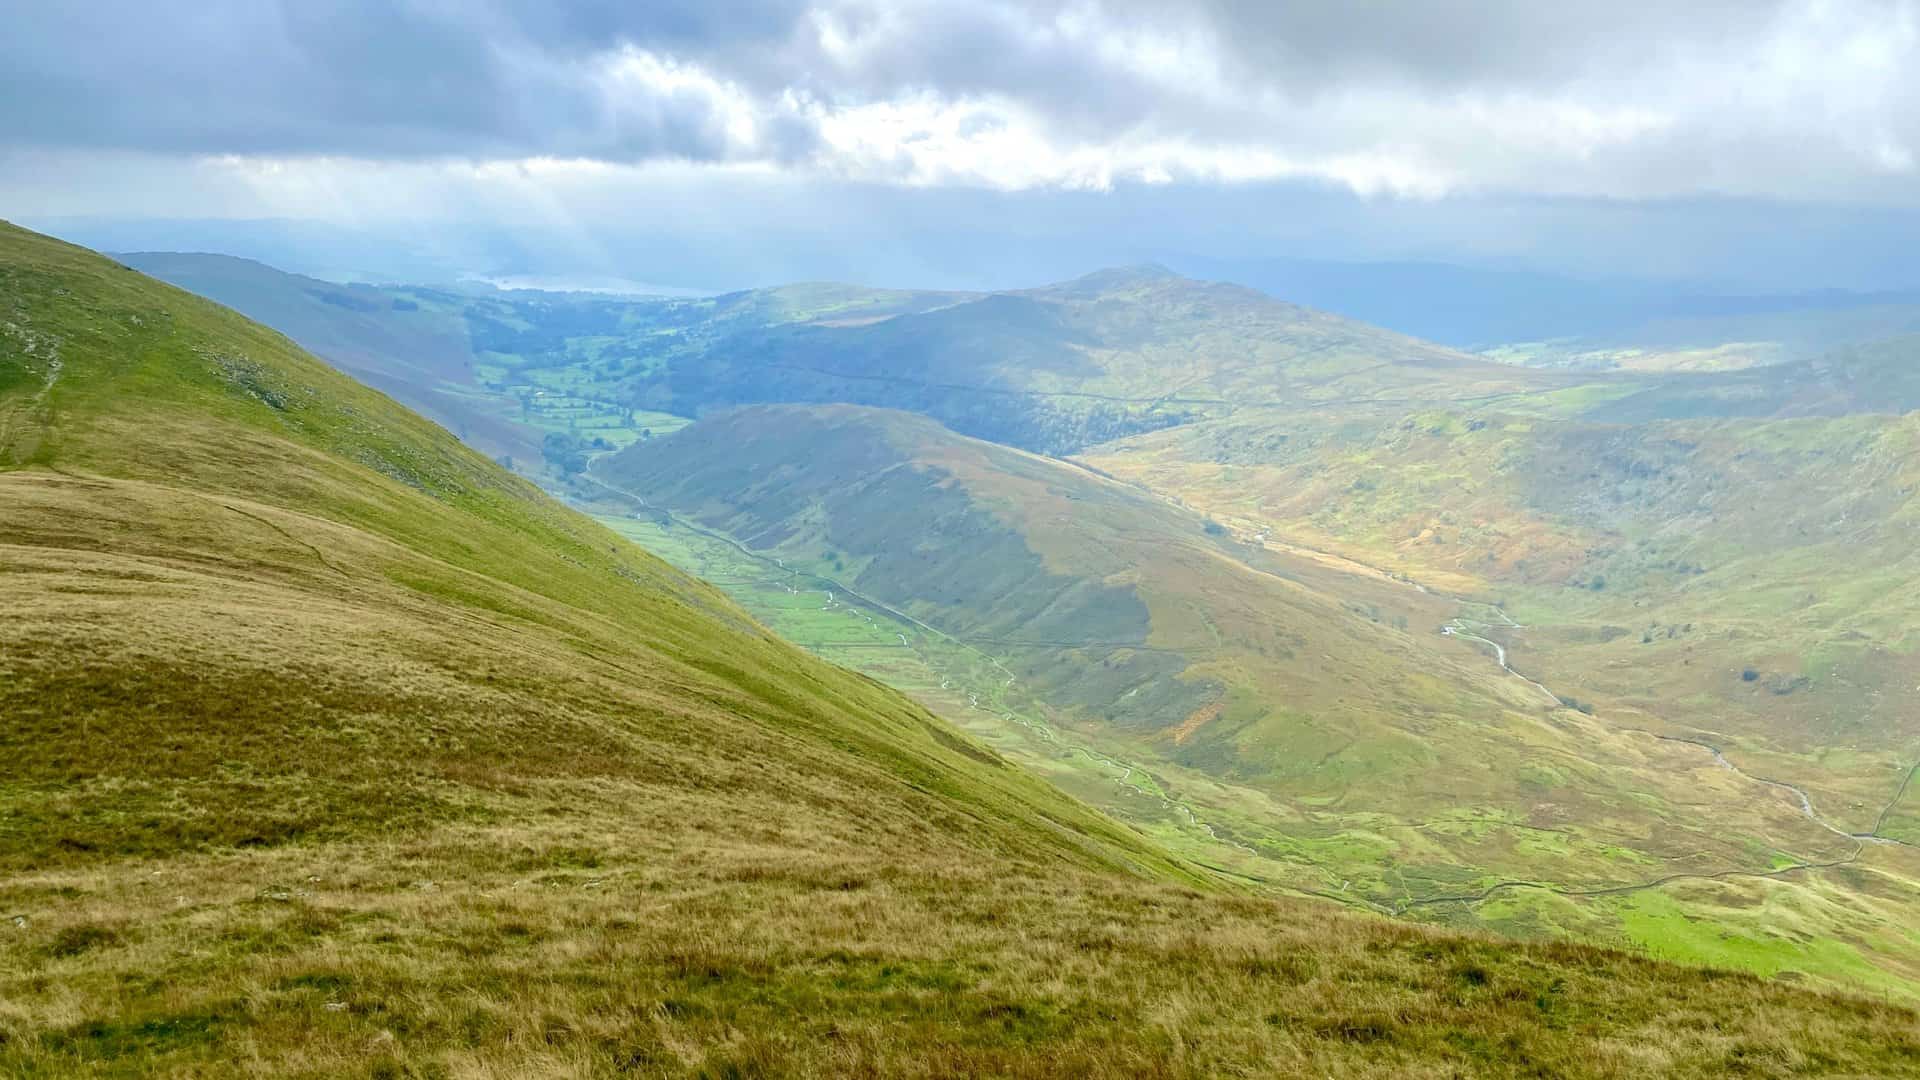 The view south-west from Froswick. The high ground in the middle of the wide valley is The Tongue, with Hagg Gill flowing on its left (east) side and Trout Beck on its right (west) side. The pointed fell in the distance is Wansfell.